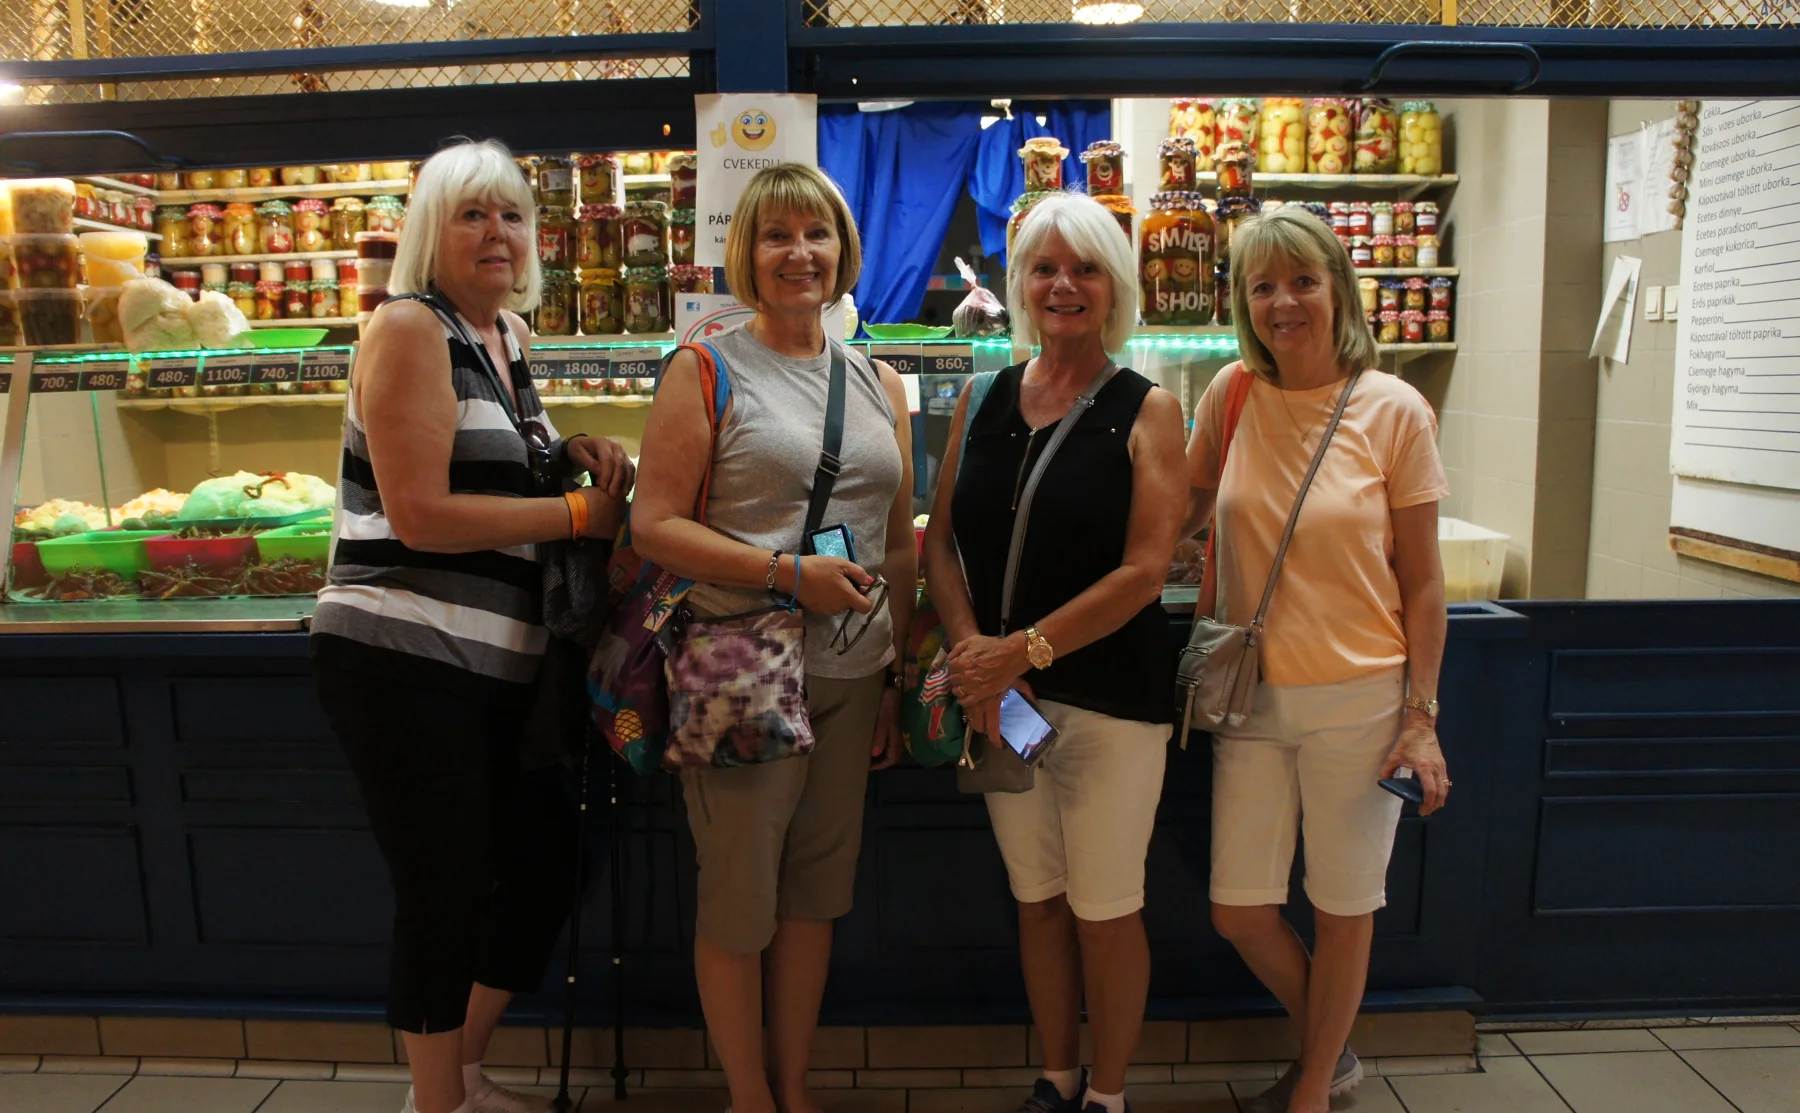 Market Tour & Cooking Class with a Professional Chef - 462367